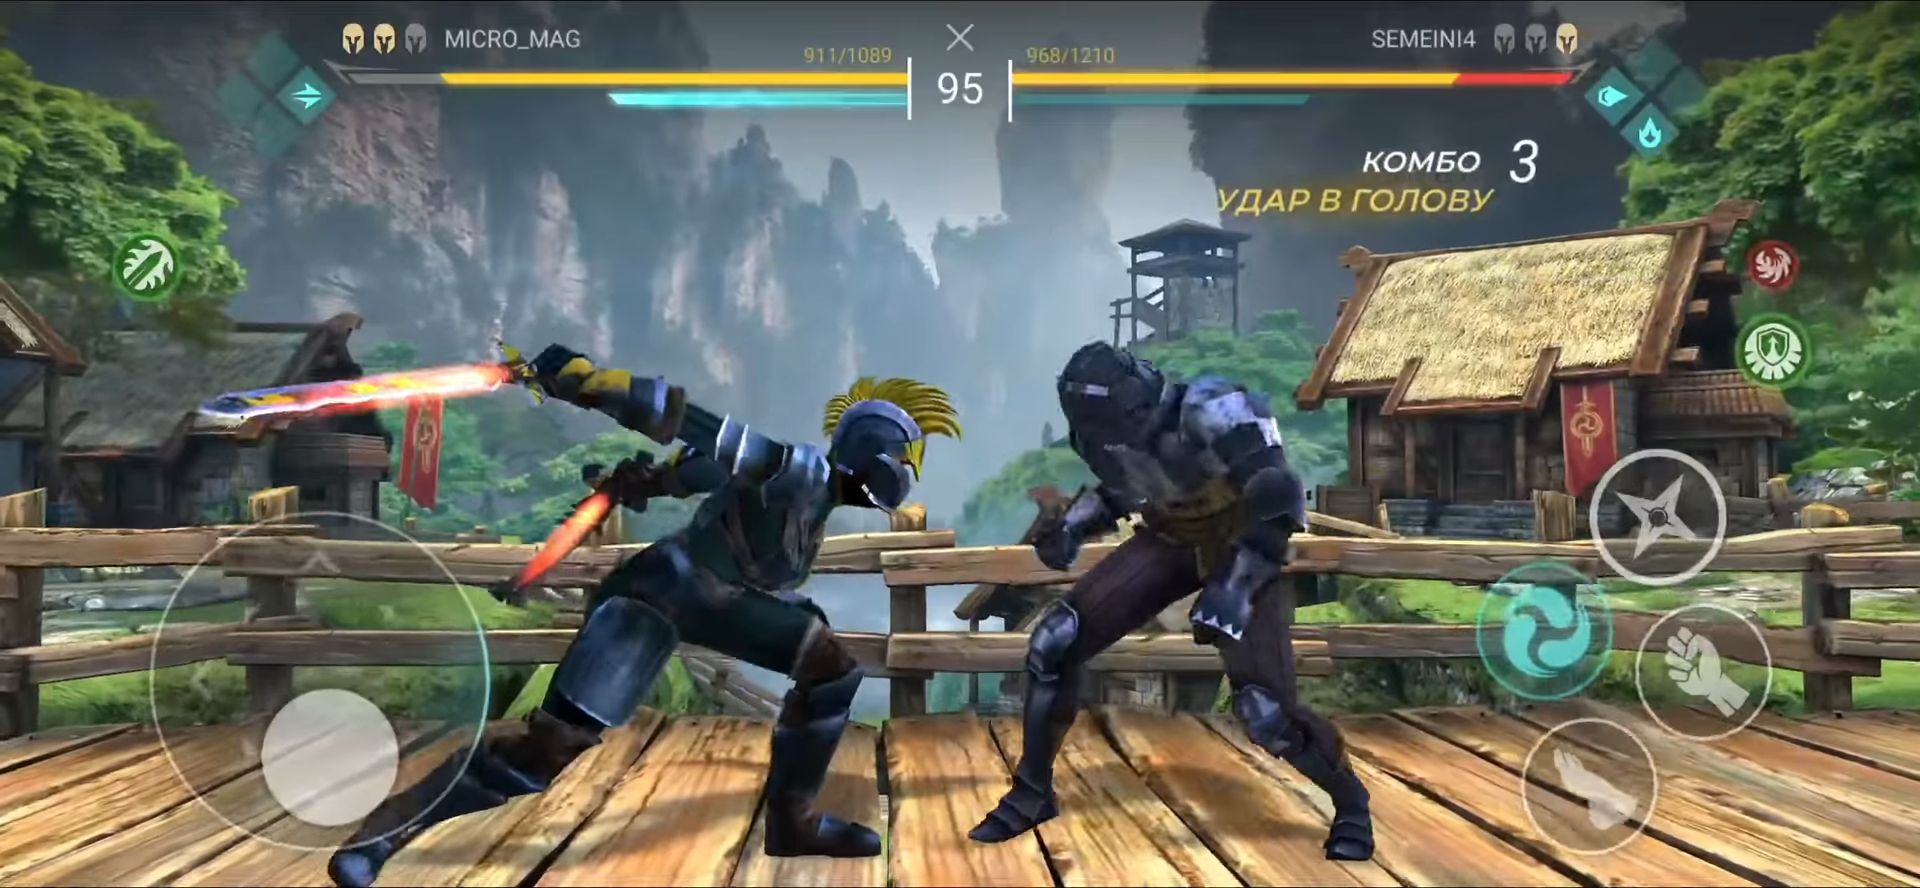 shadow fight 4 arena pvp download download free